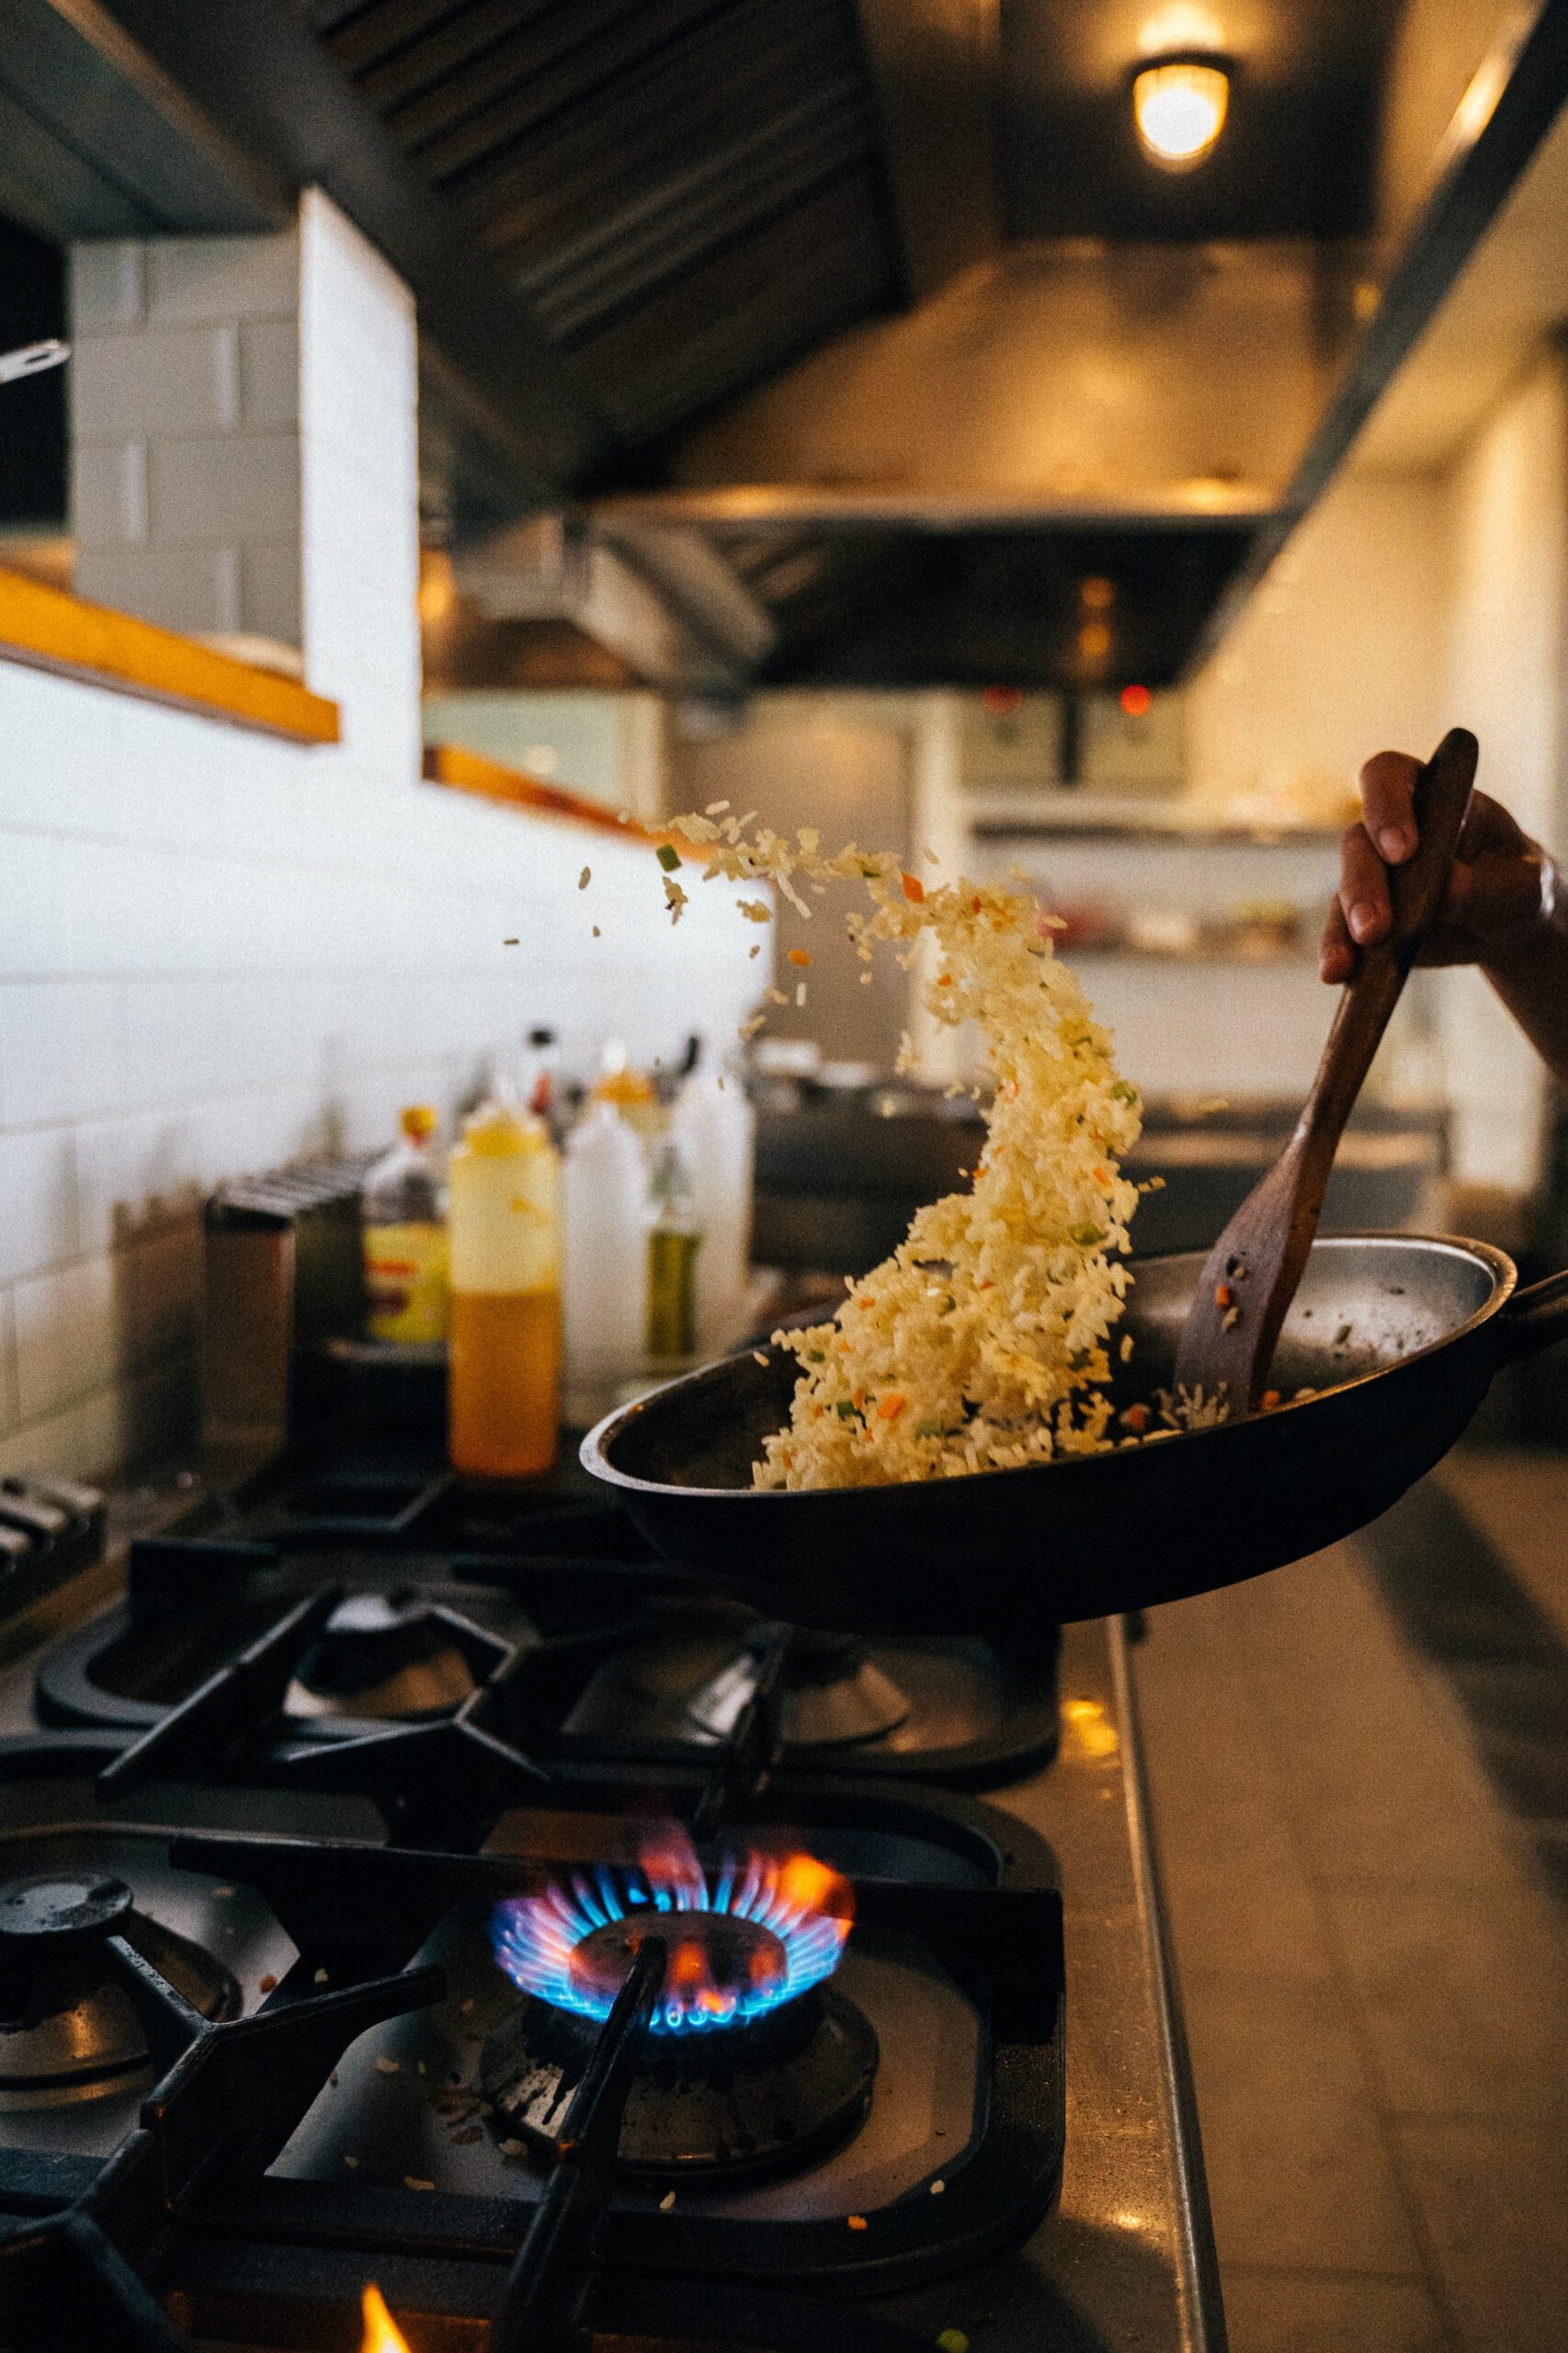 Stockphoto of fried rice being tossed